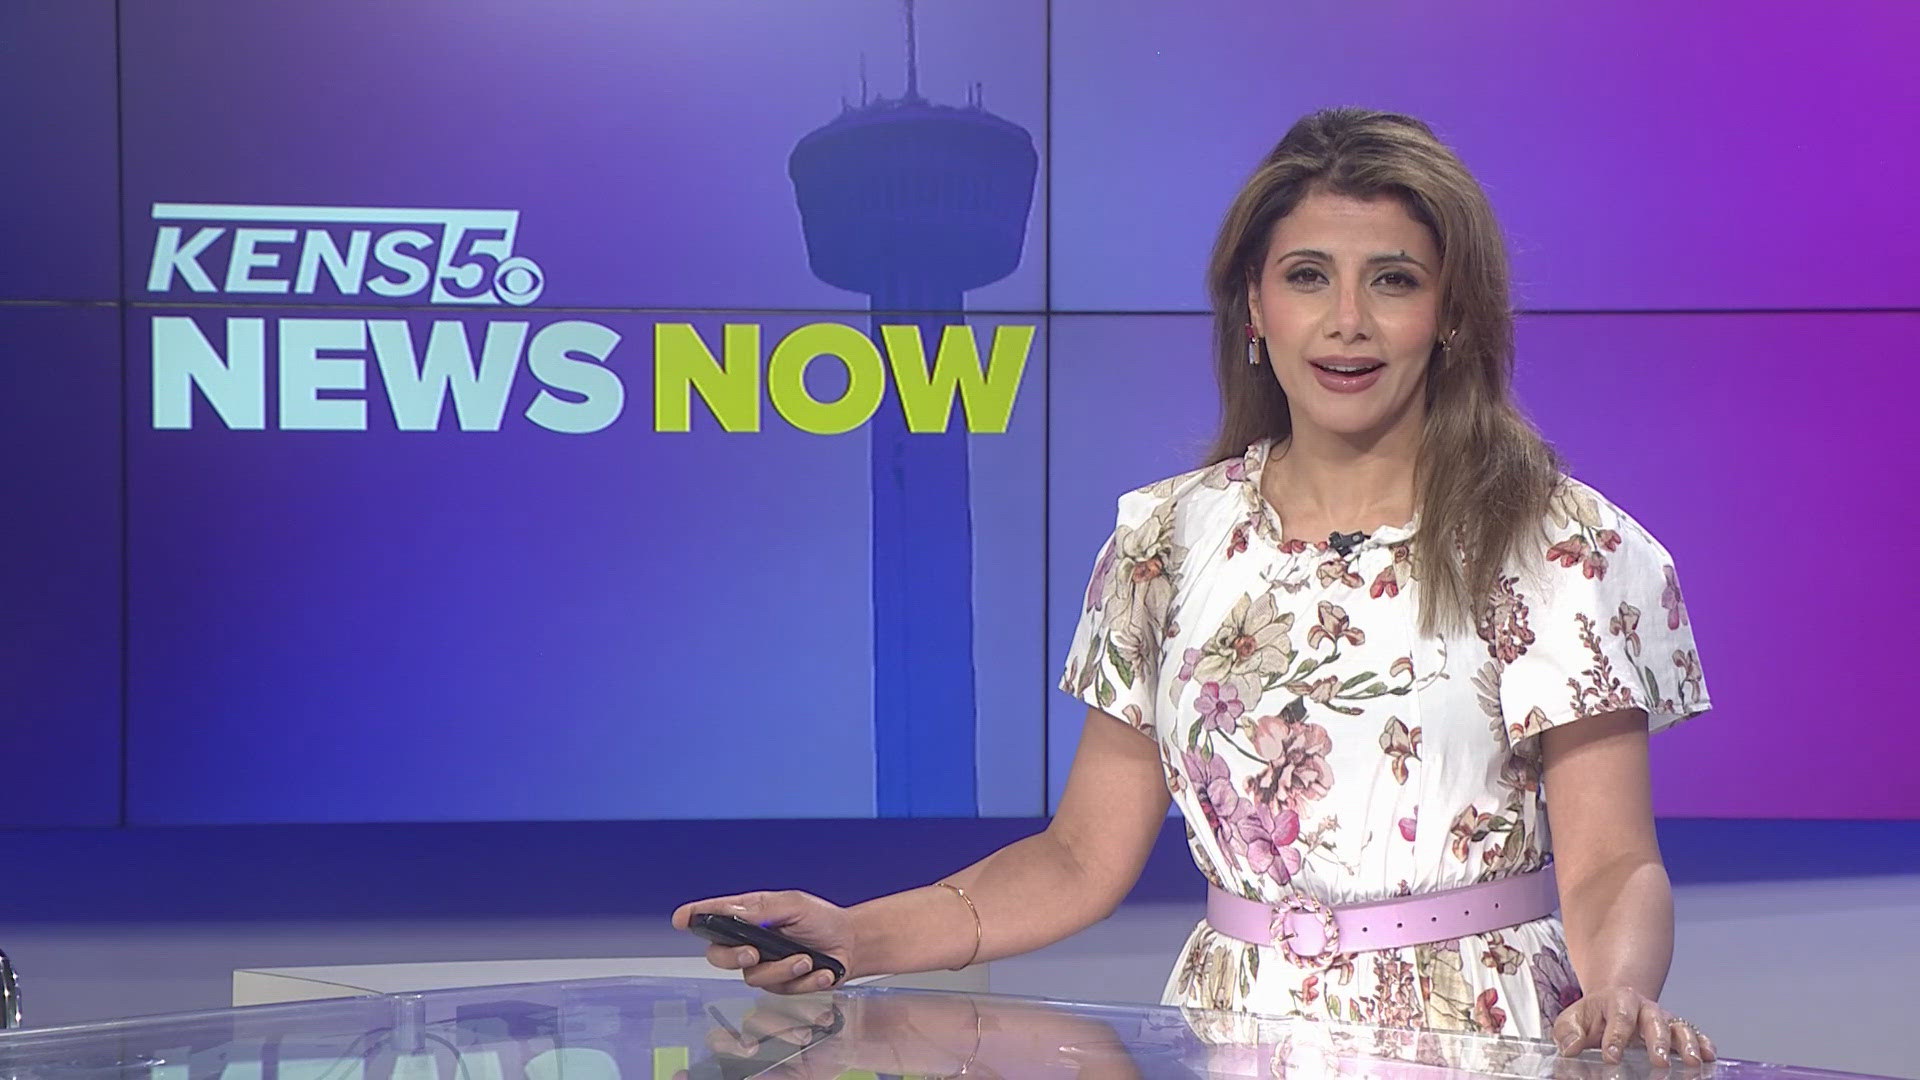 Follow us here to get the latest top headlines with KENS 5's Sarah Forgany every weekday!